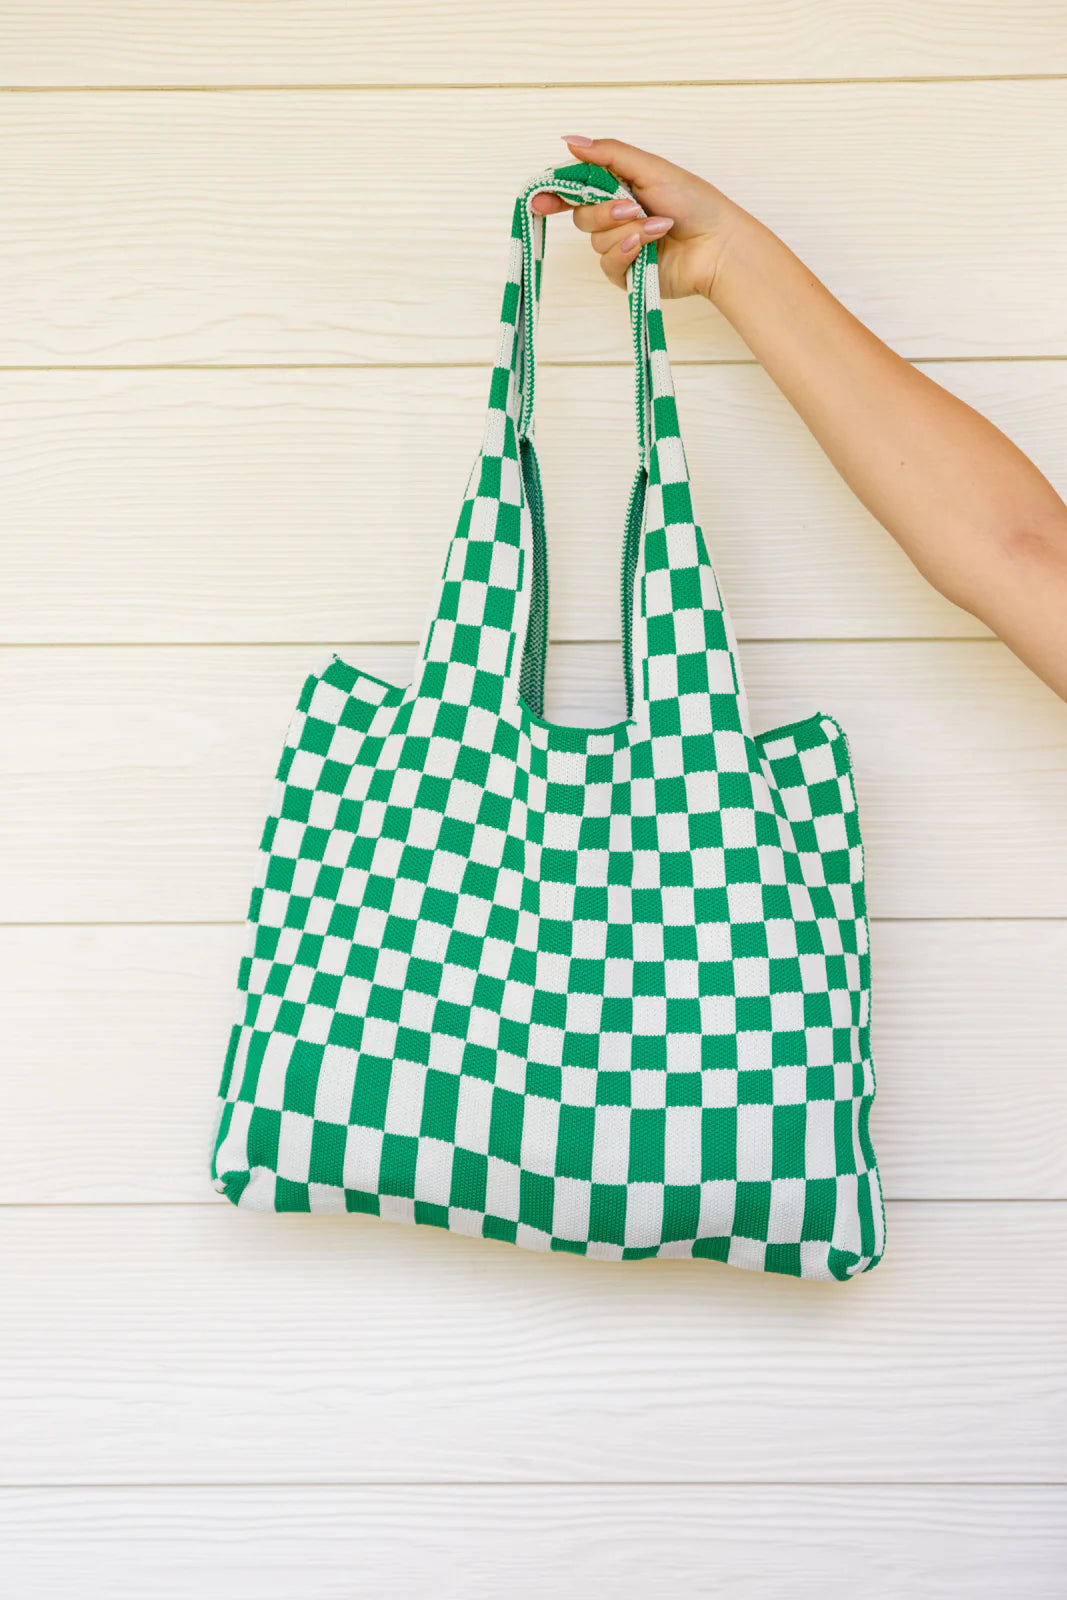 Checkered Tote Bag - Green + White - Inspired Eye Boutique